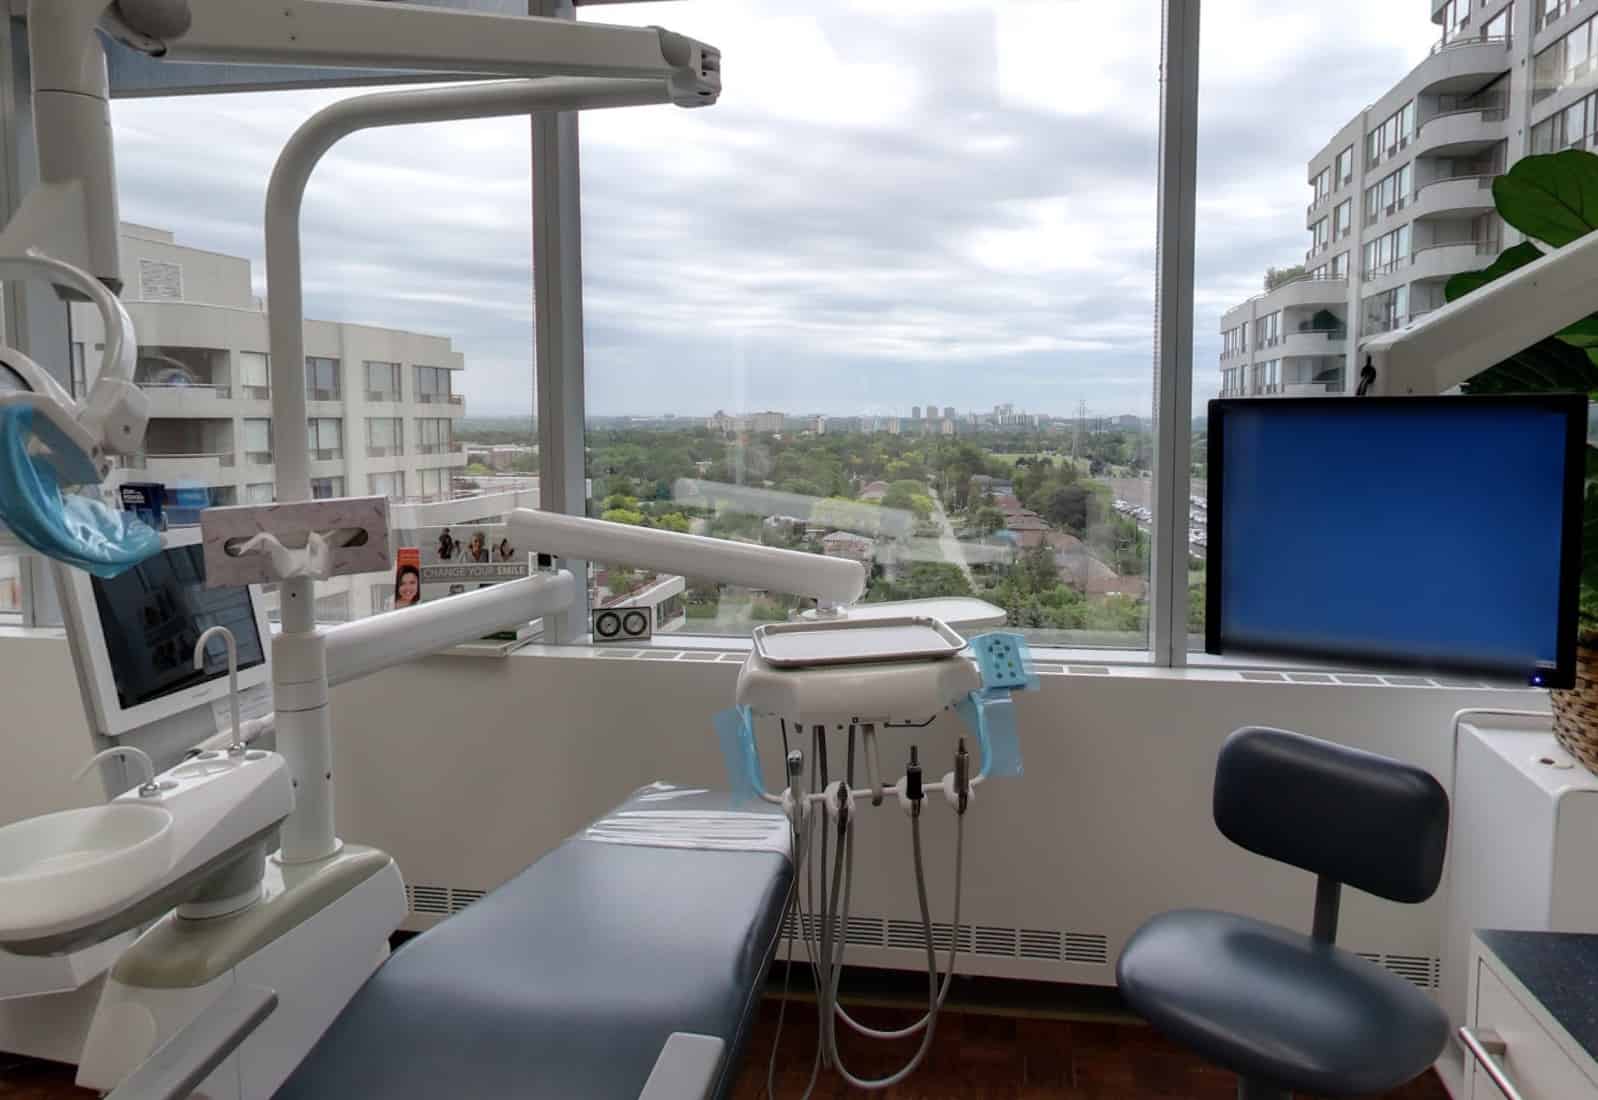 Dentist's chair and digital screen inside clinic overlooking outdoor scenery.